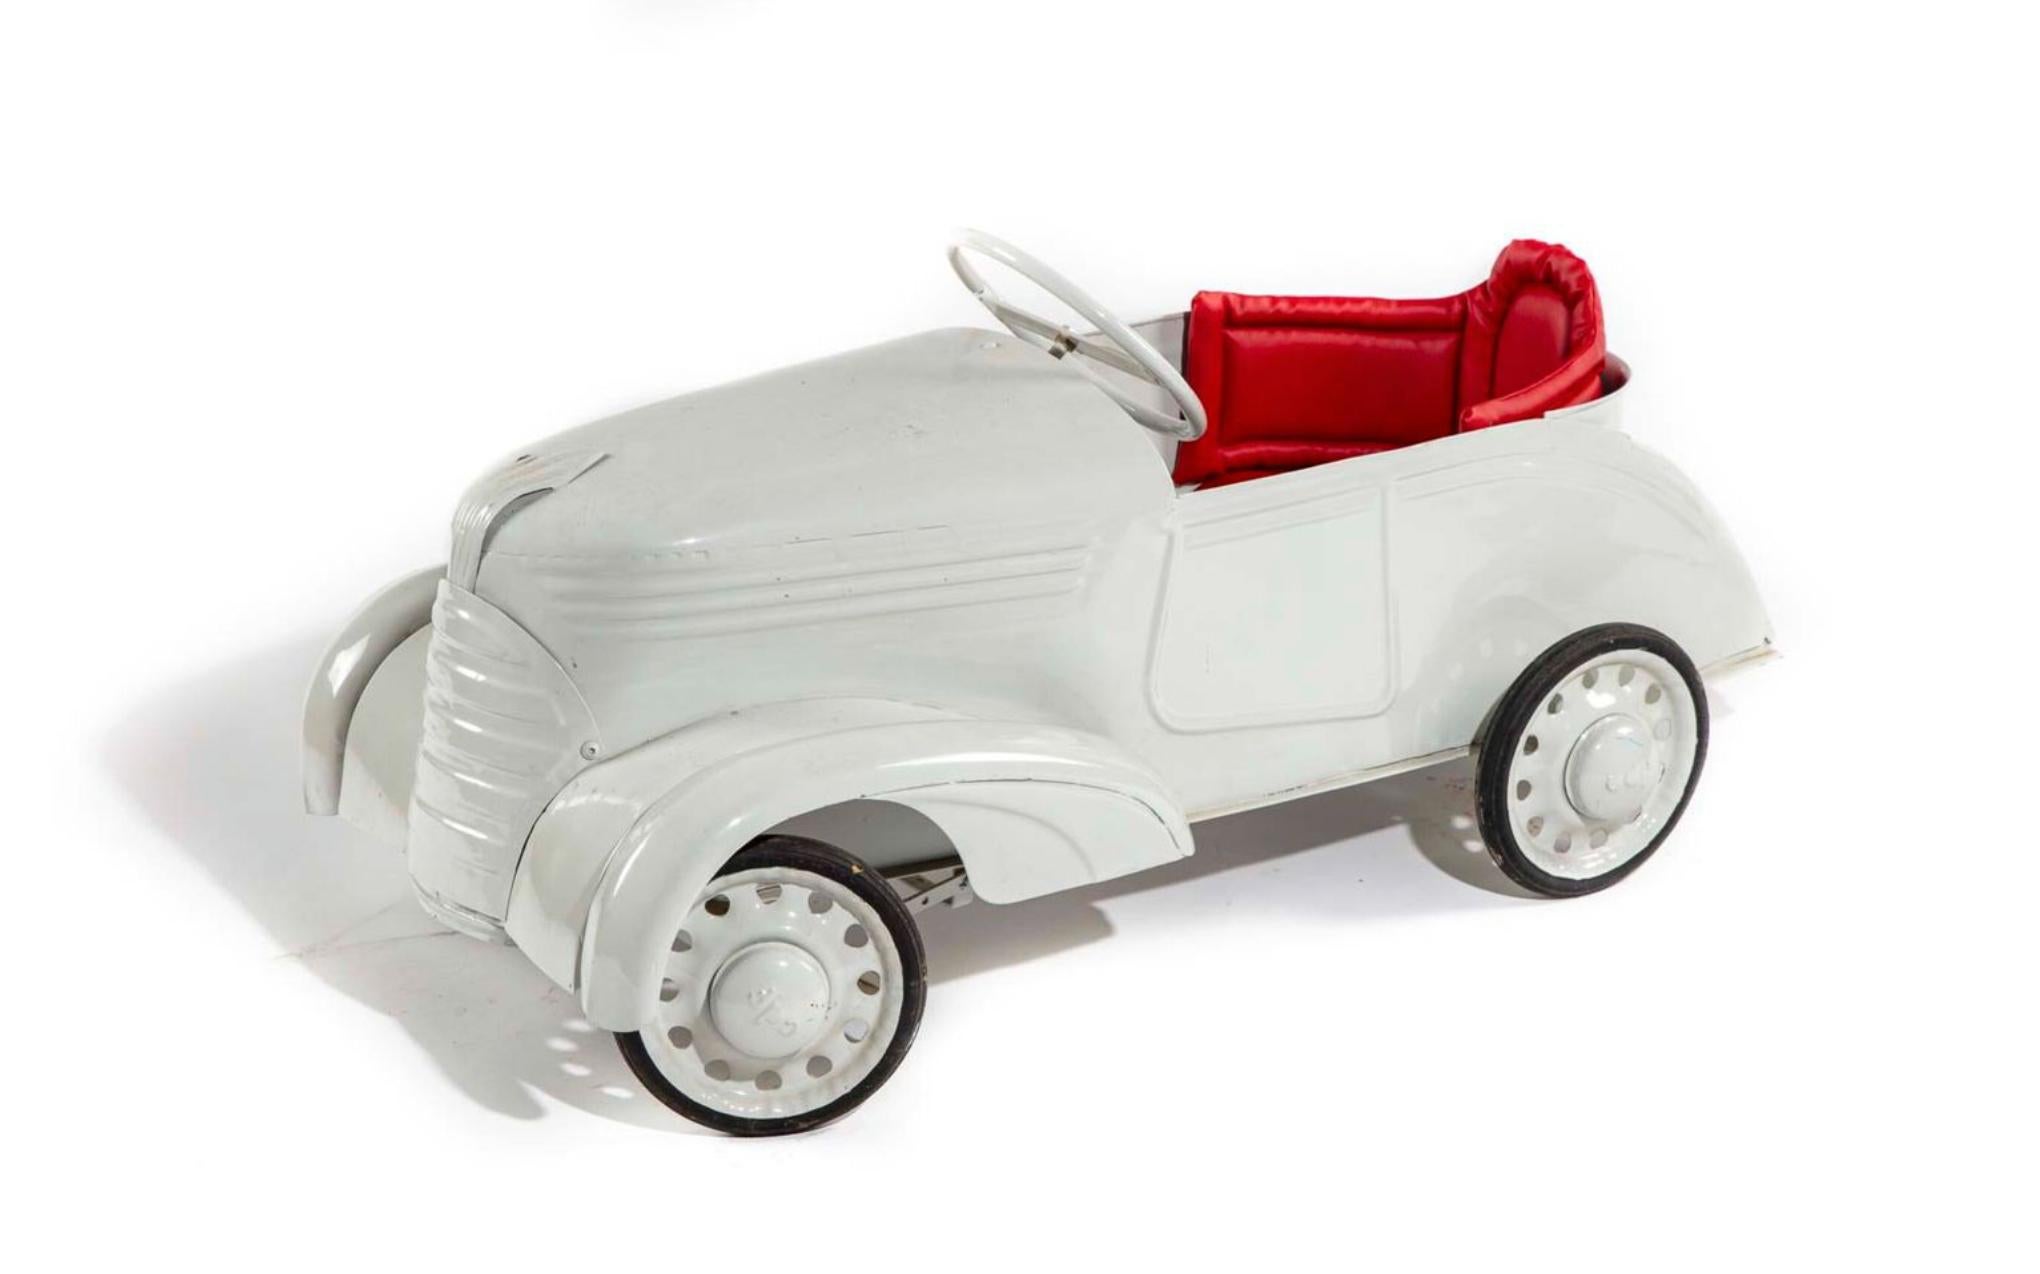 Rare large sized vintage pedal car in white metal with hot red seat. Very good condition.
France, circa 1950.
 